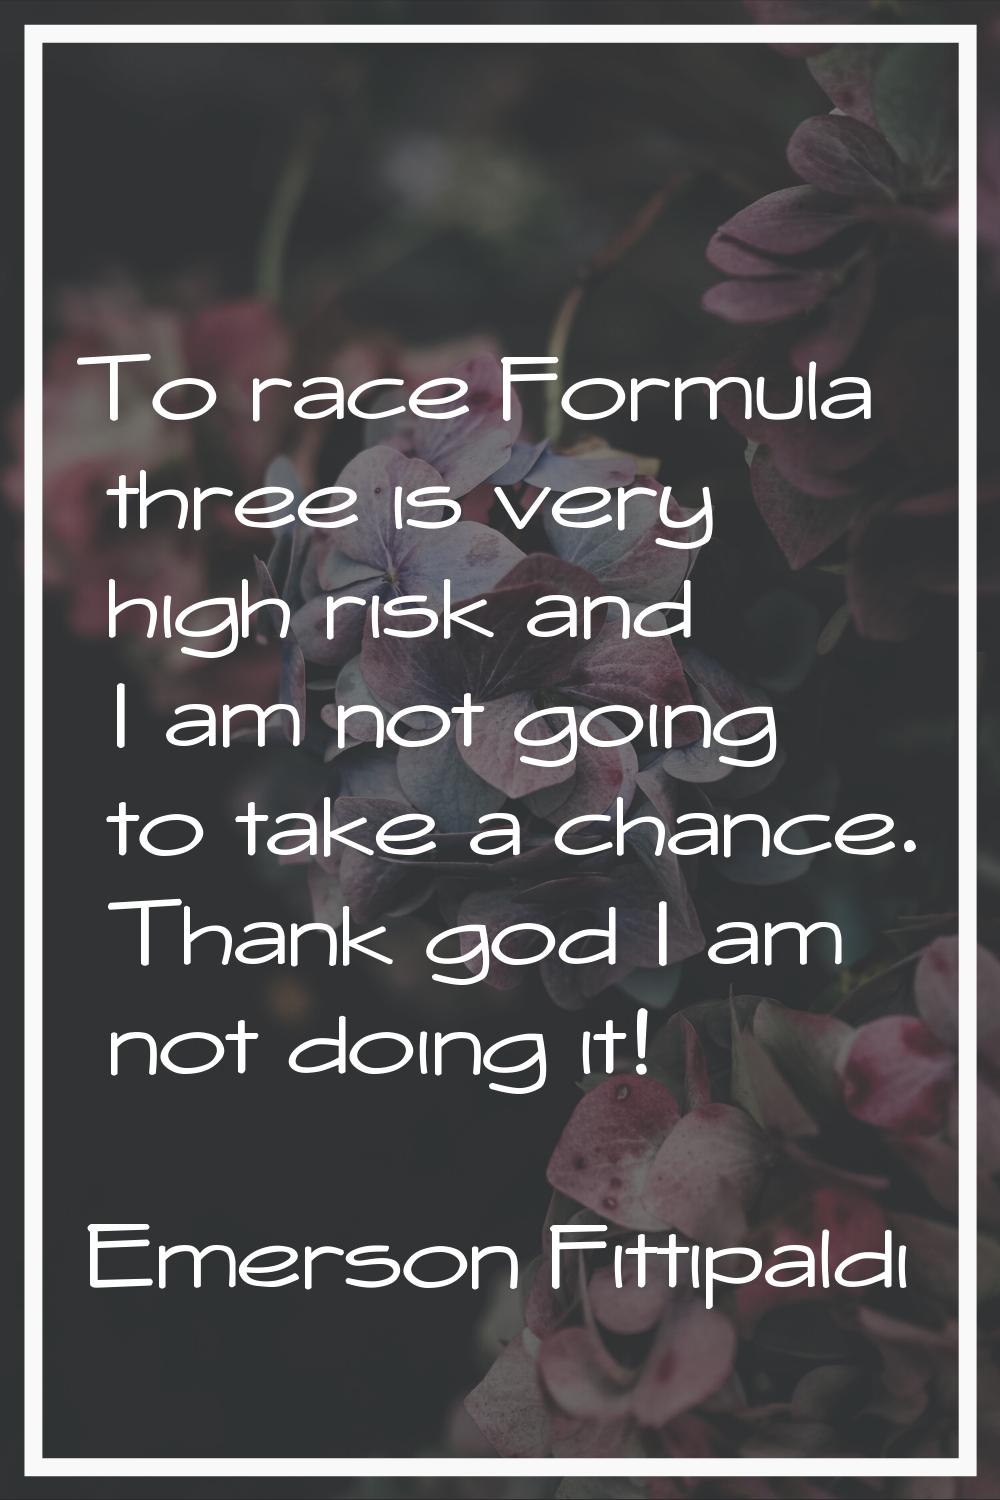 To race Formula three is very high risk and I am not going to take a chance. Thank god I am not doi